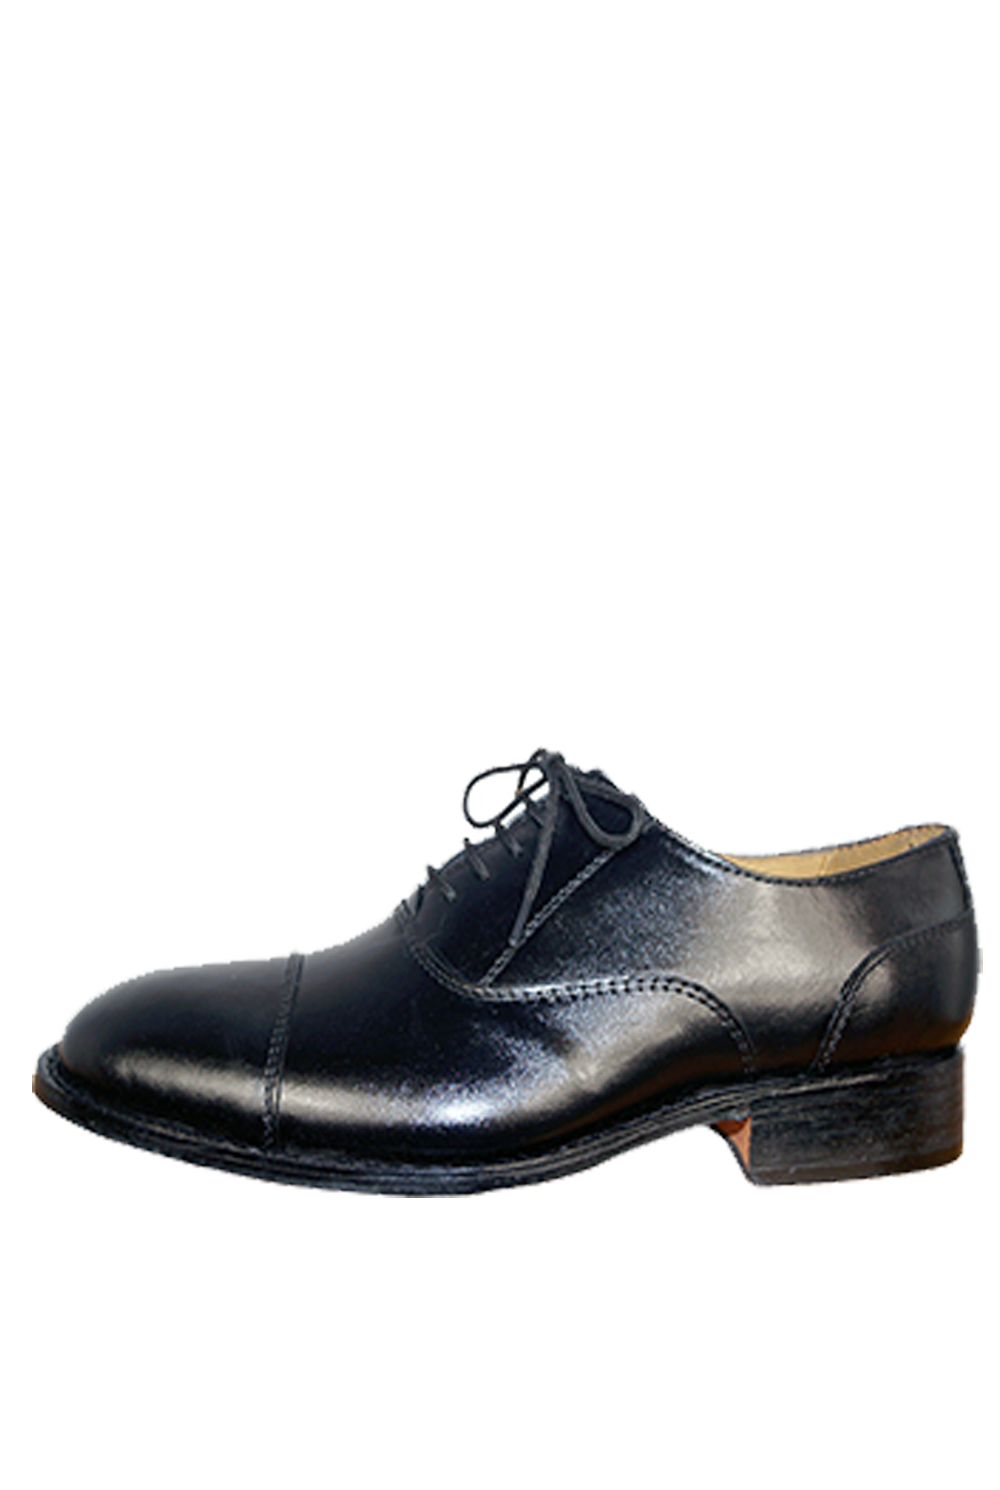 CLASSIC LEATHER SHOE - apparel supply